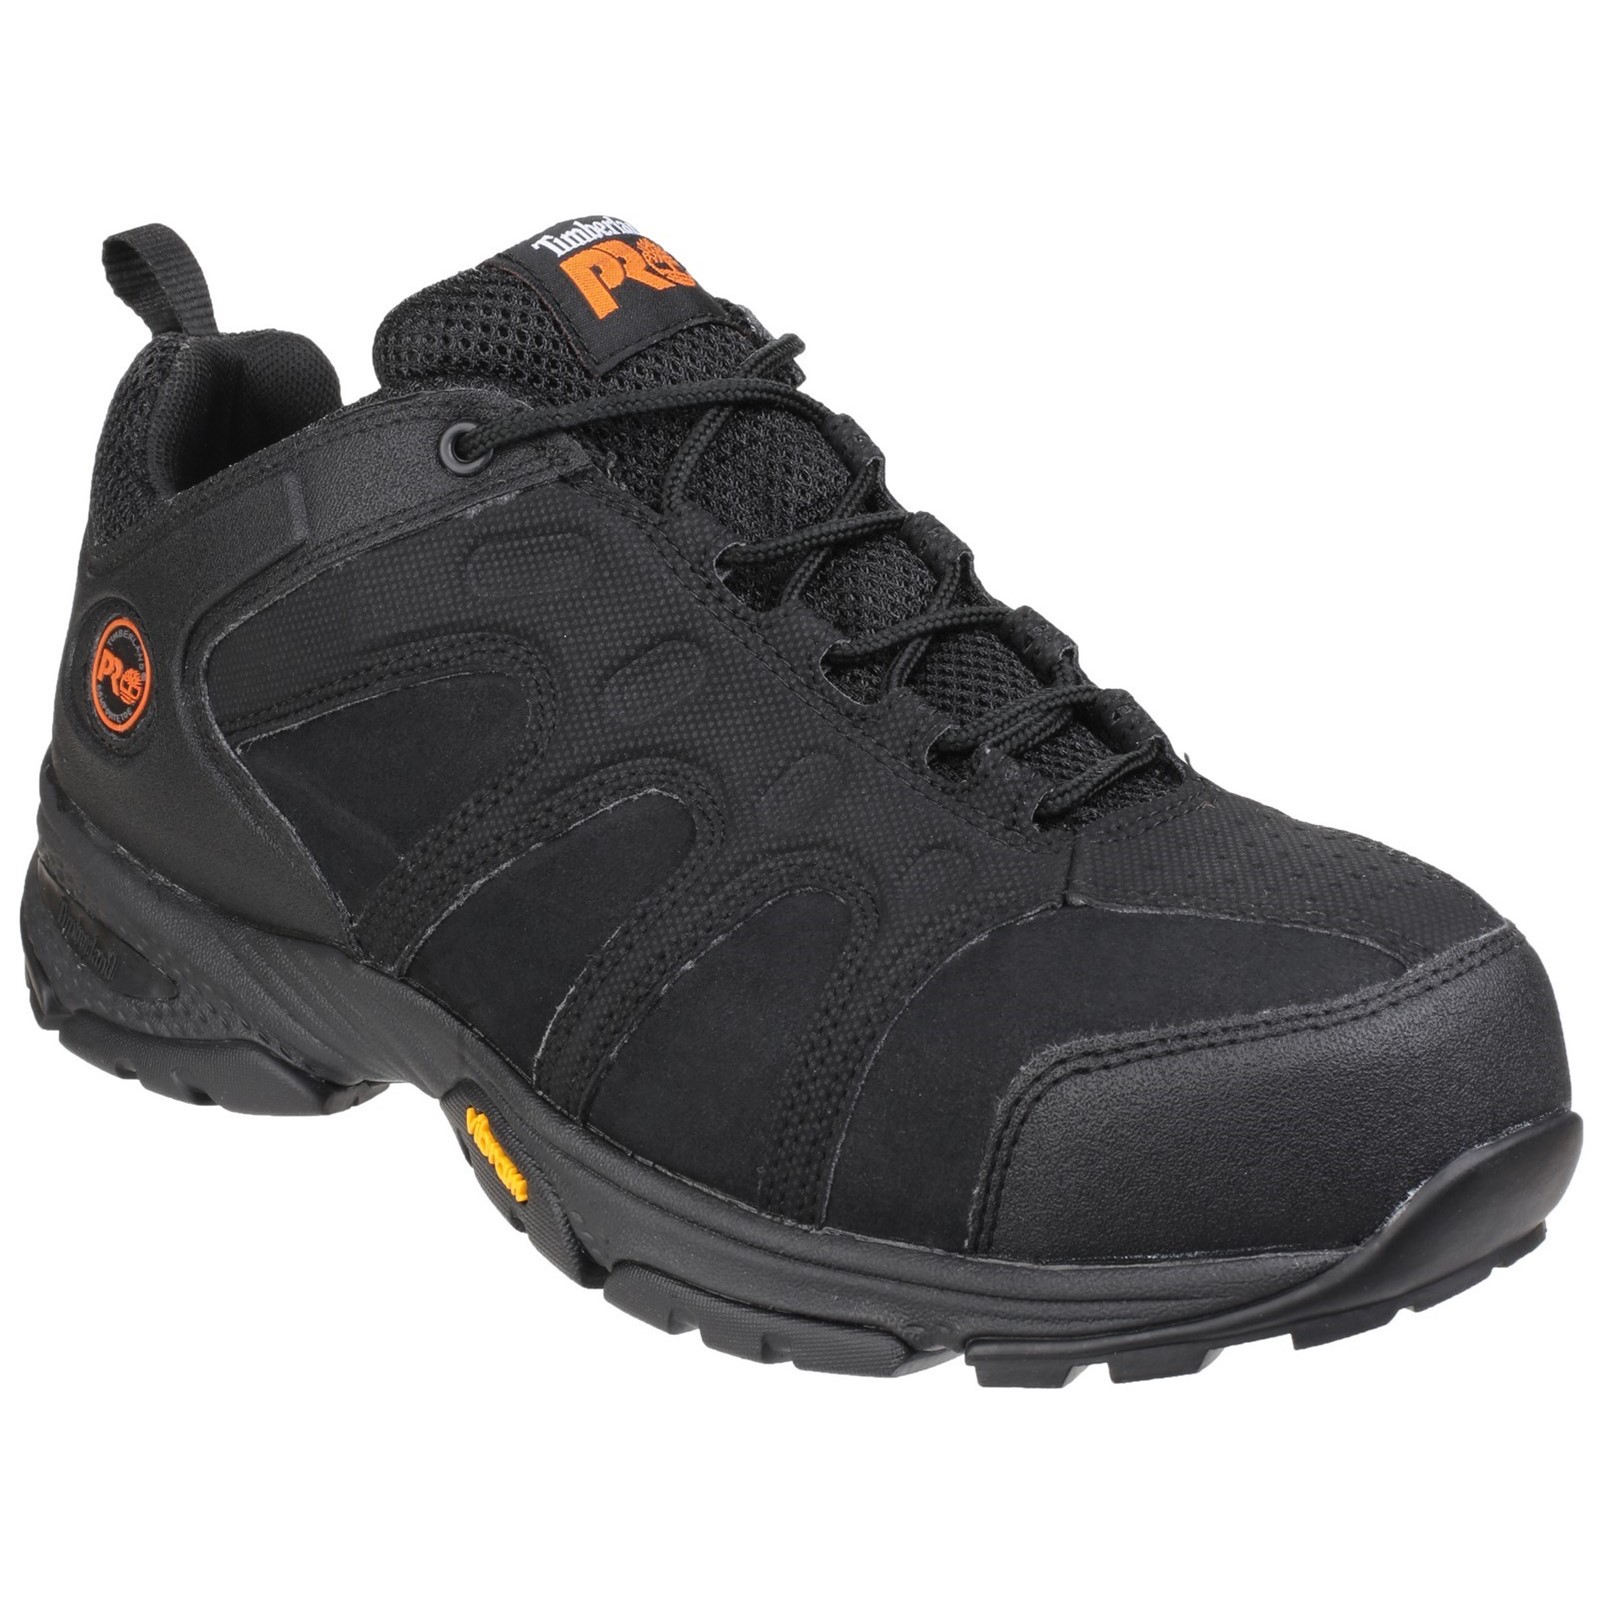 Wildcard Lace-up Safety Shoe